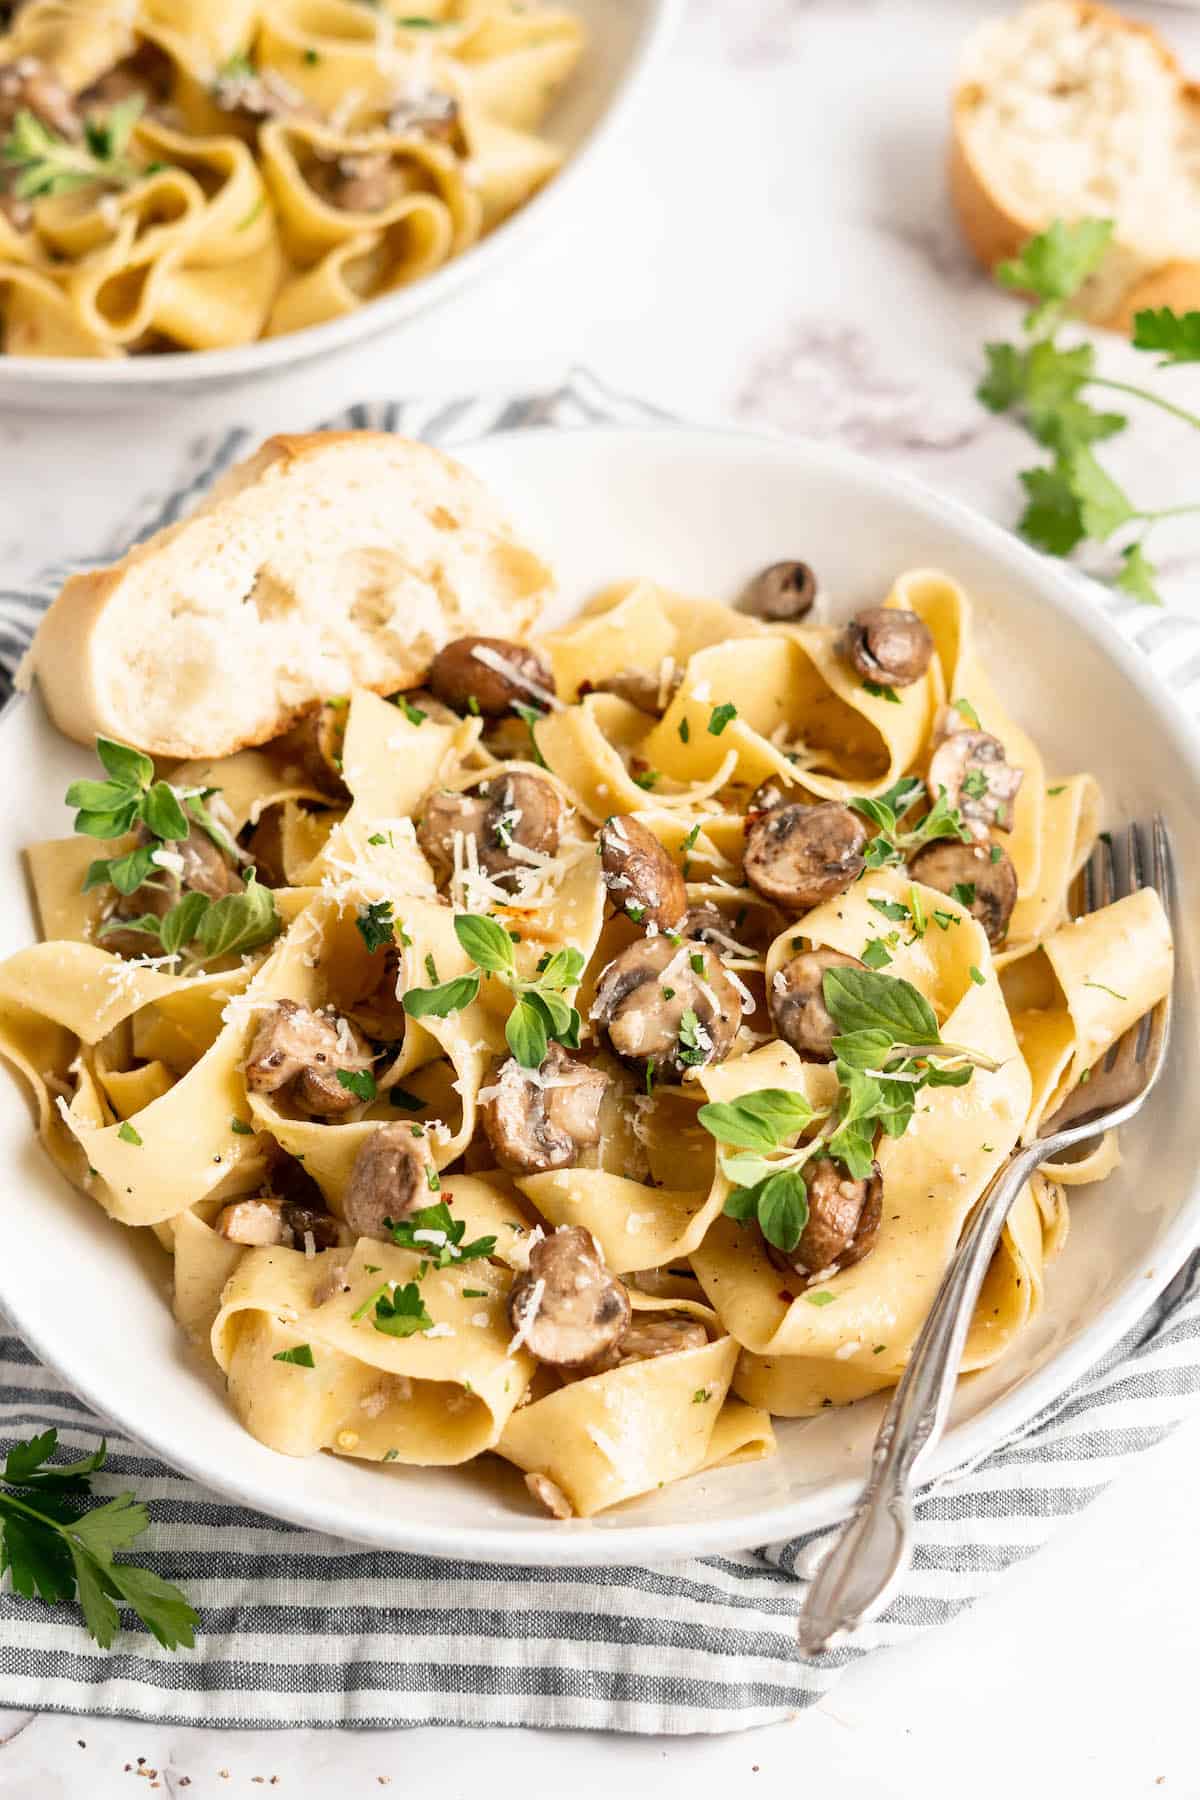 Creamy Garlic Mushroom Pasta in white bowl with fork and slice of bread